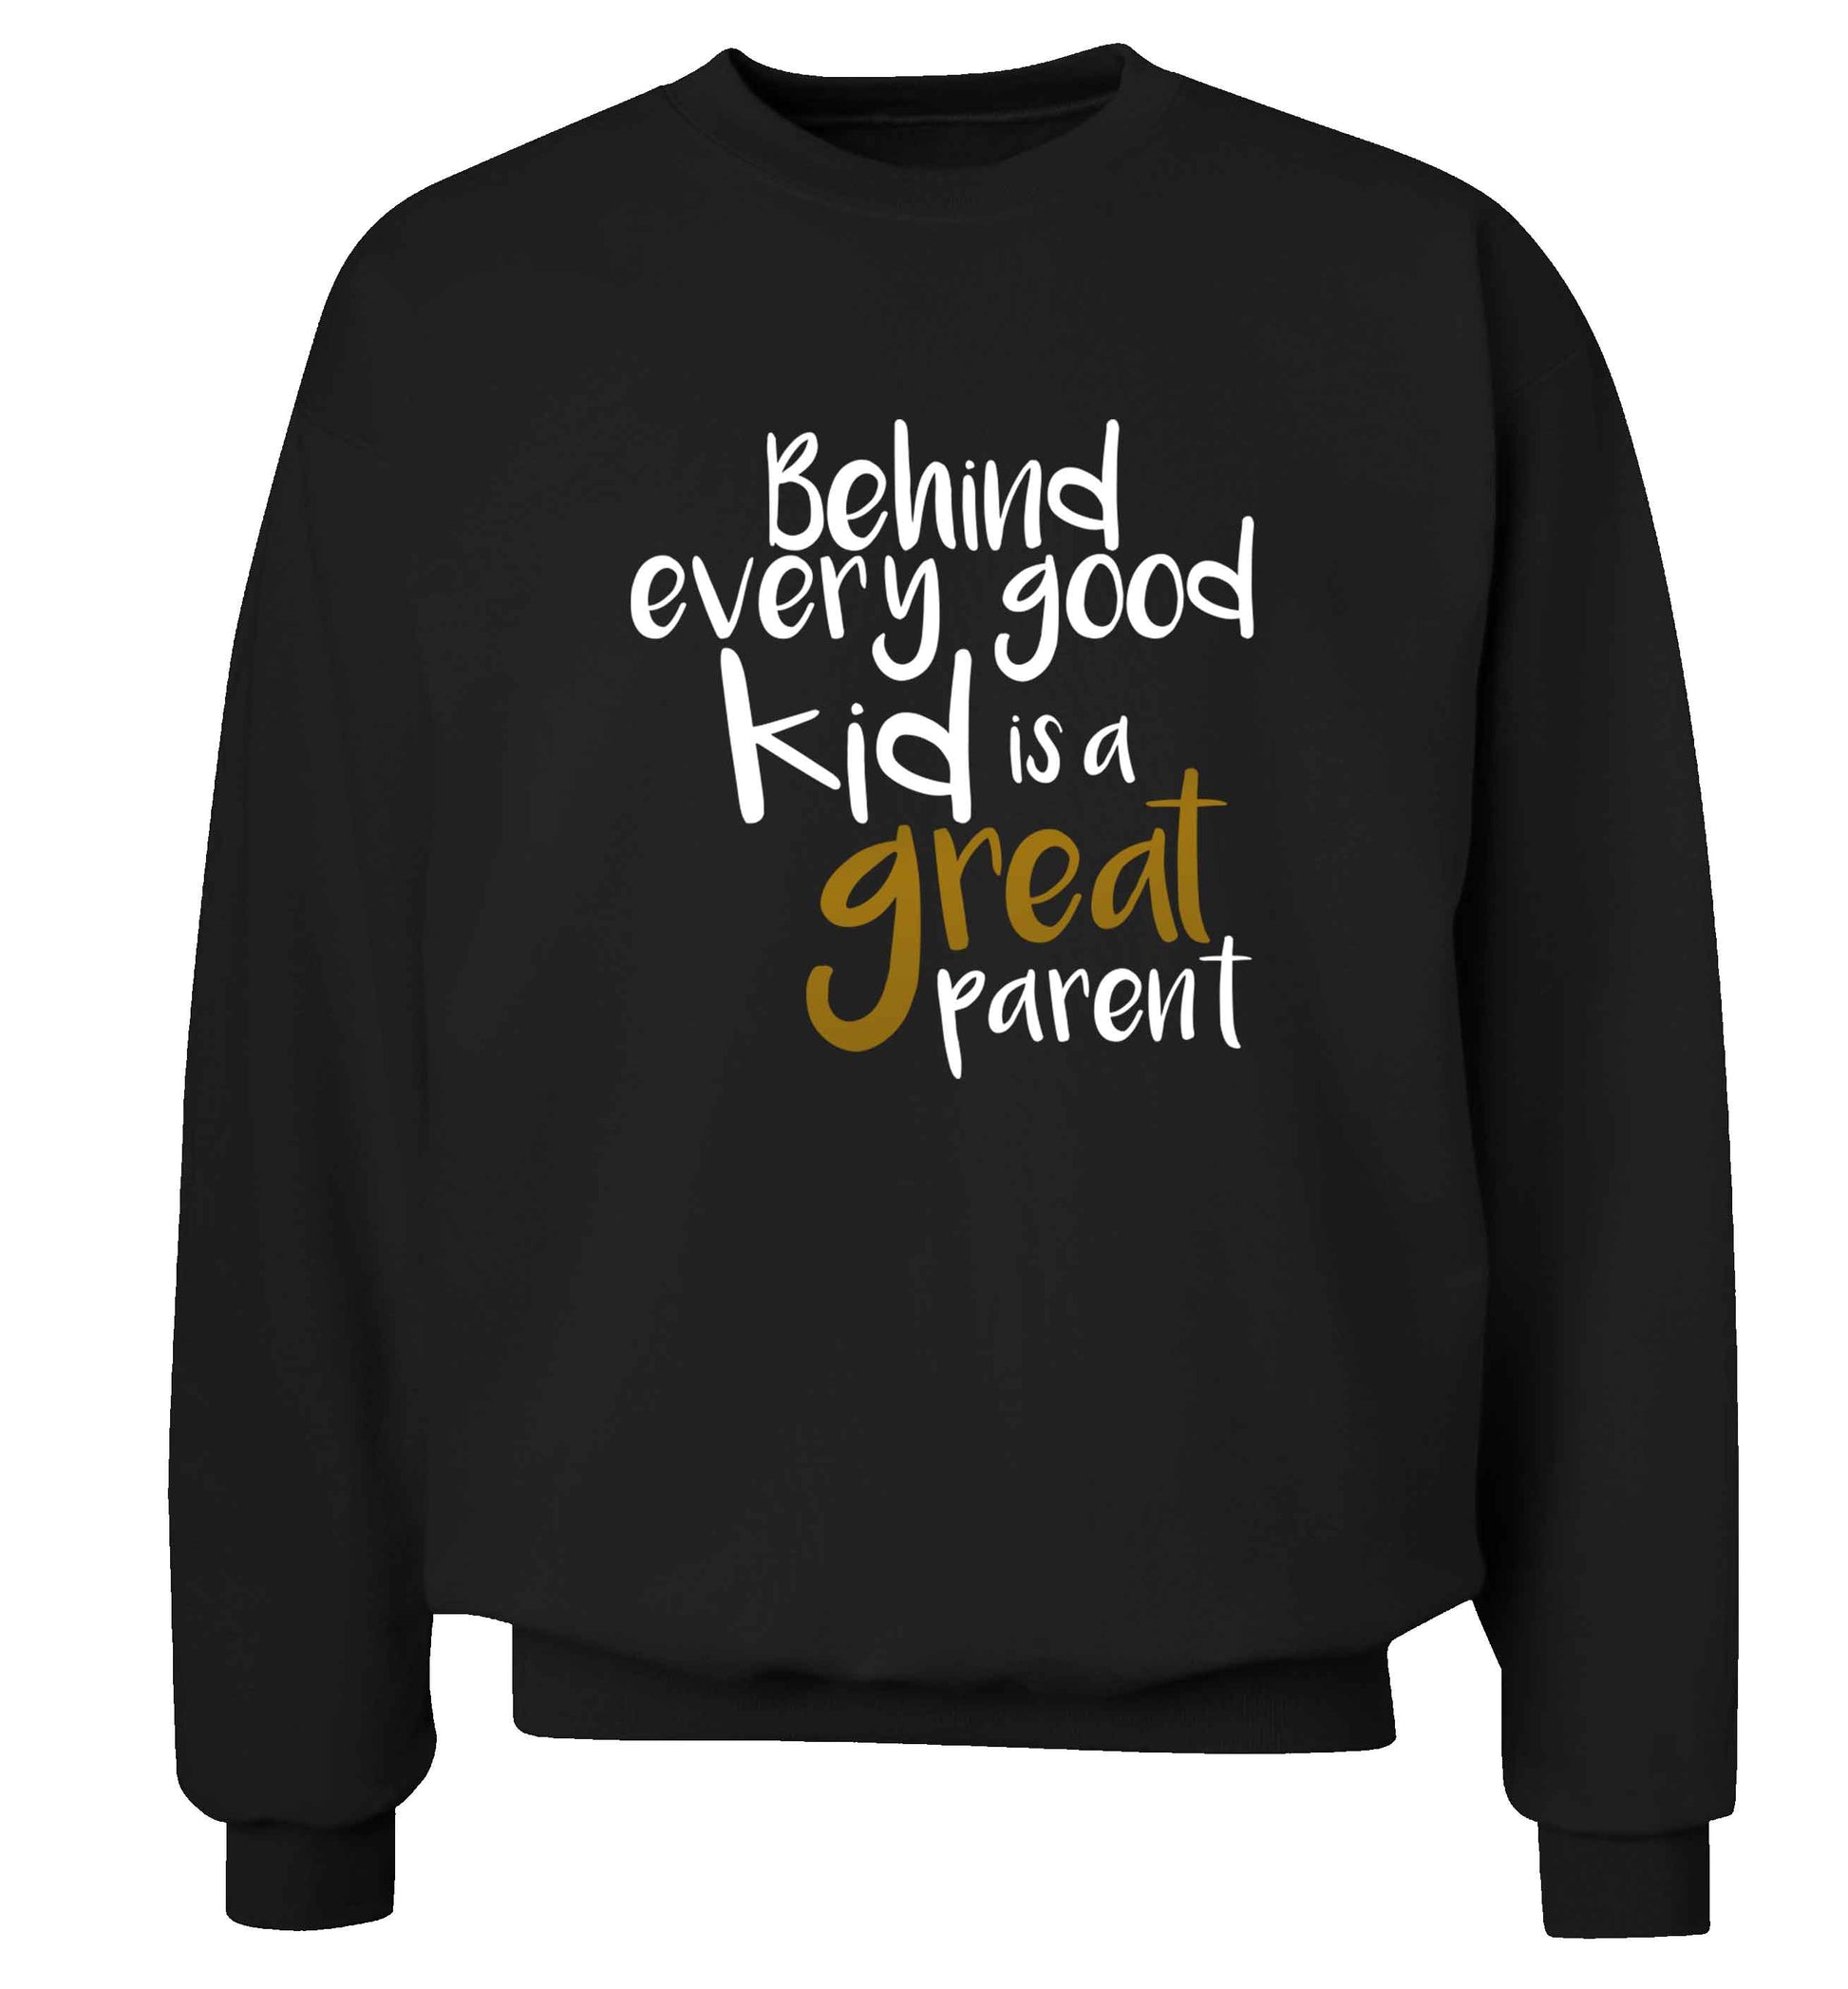 Behind every good kid is a great parent adult's unisex black sweater 2XL